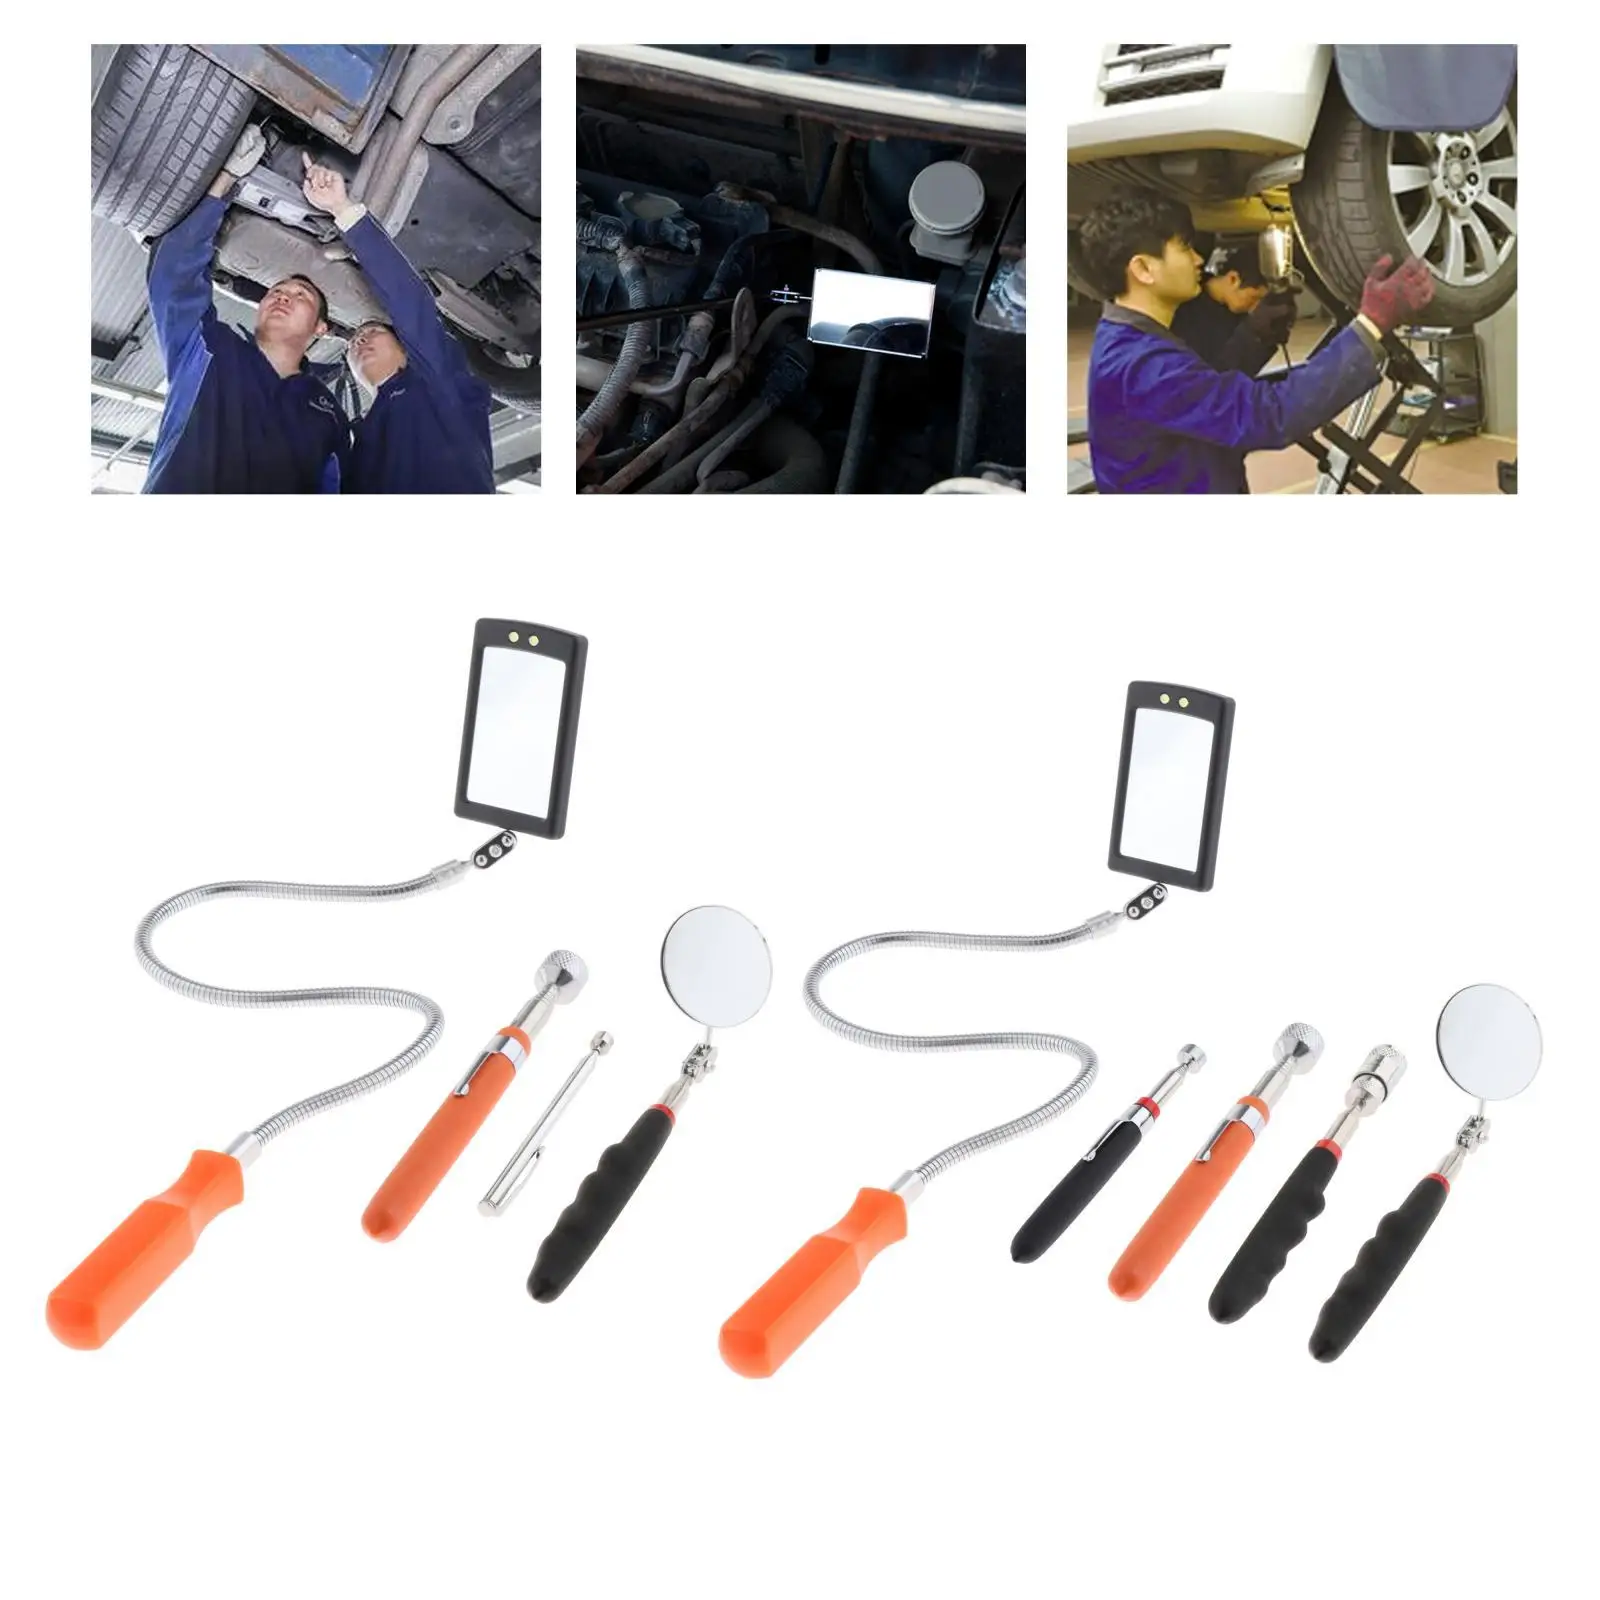  Pick-Up Grabber Tool Auto Repair Fit for Industrial Corners Dentists